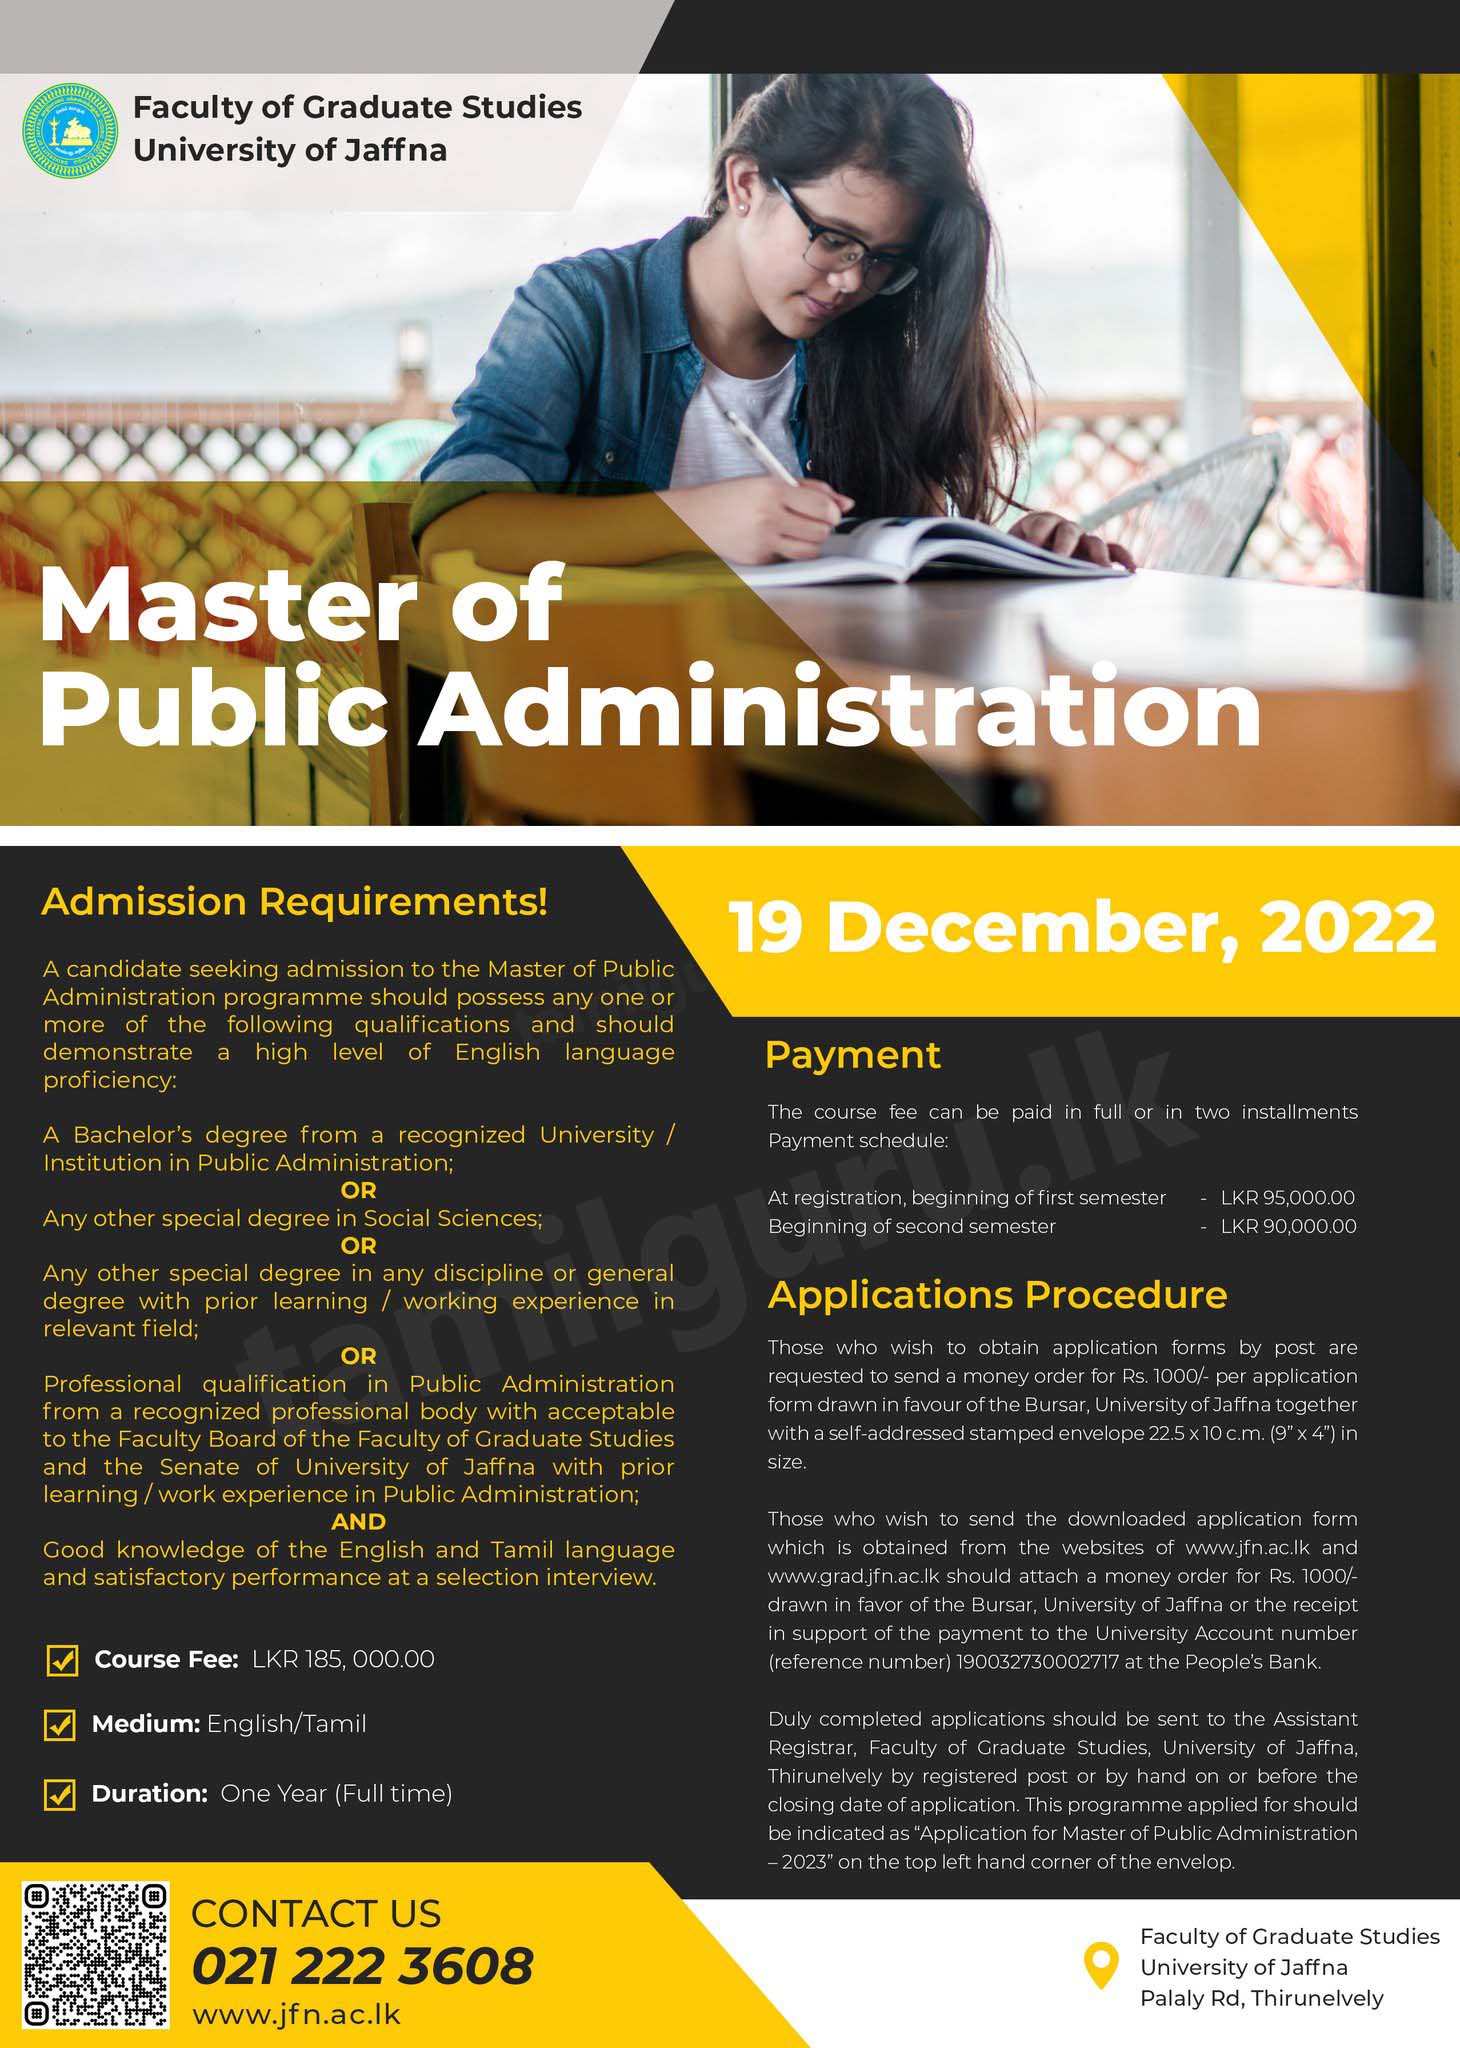 Calling Applications for Master of Public Administration 2022 - University of Jaffna